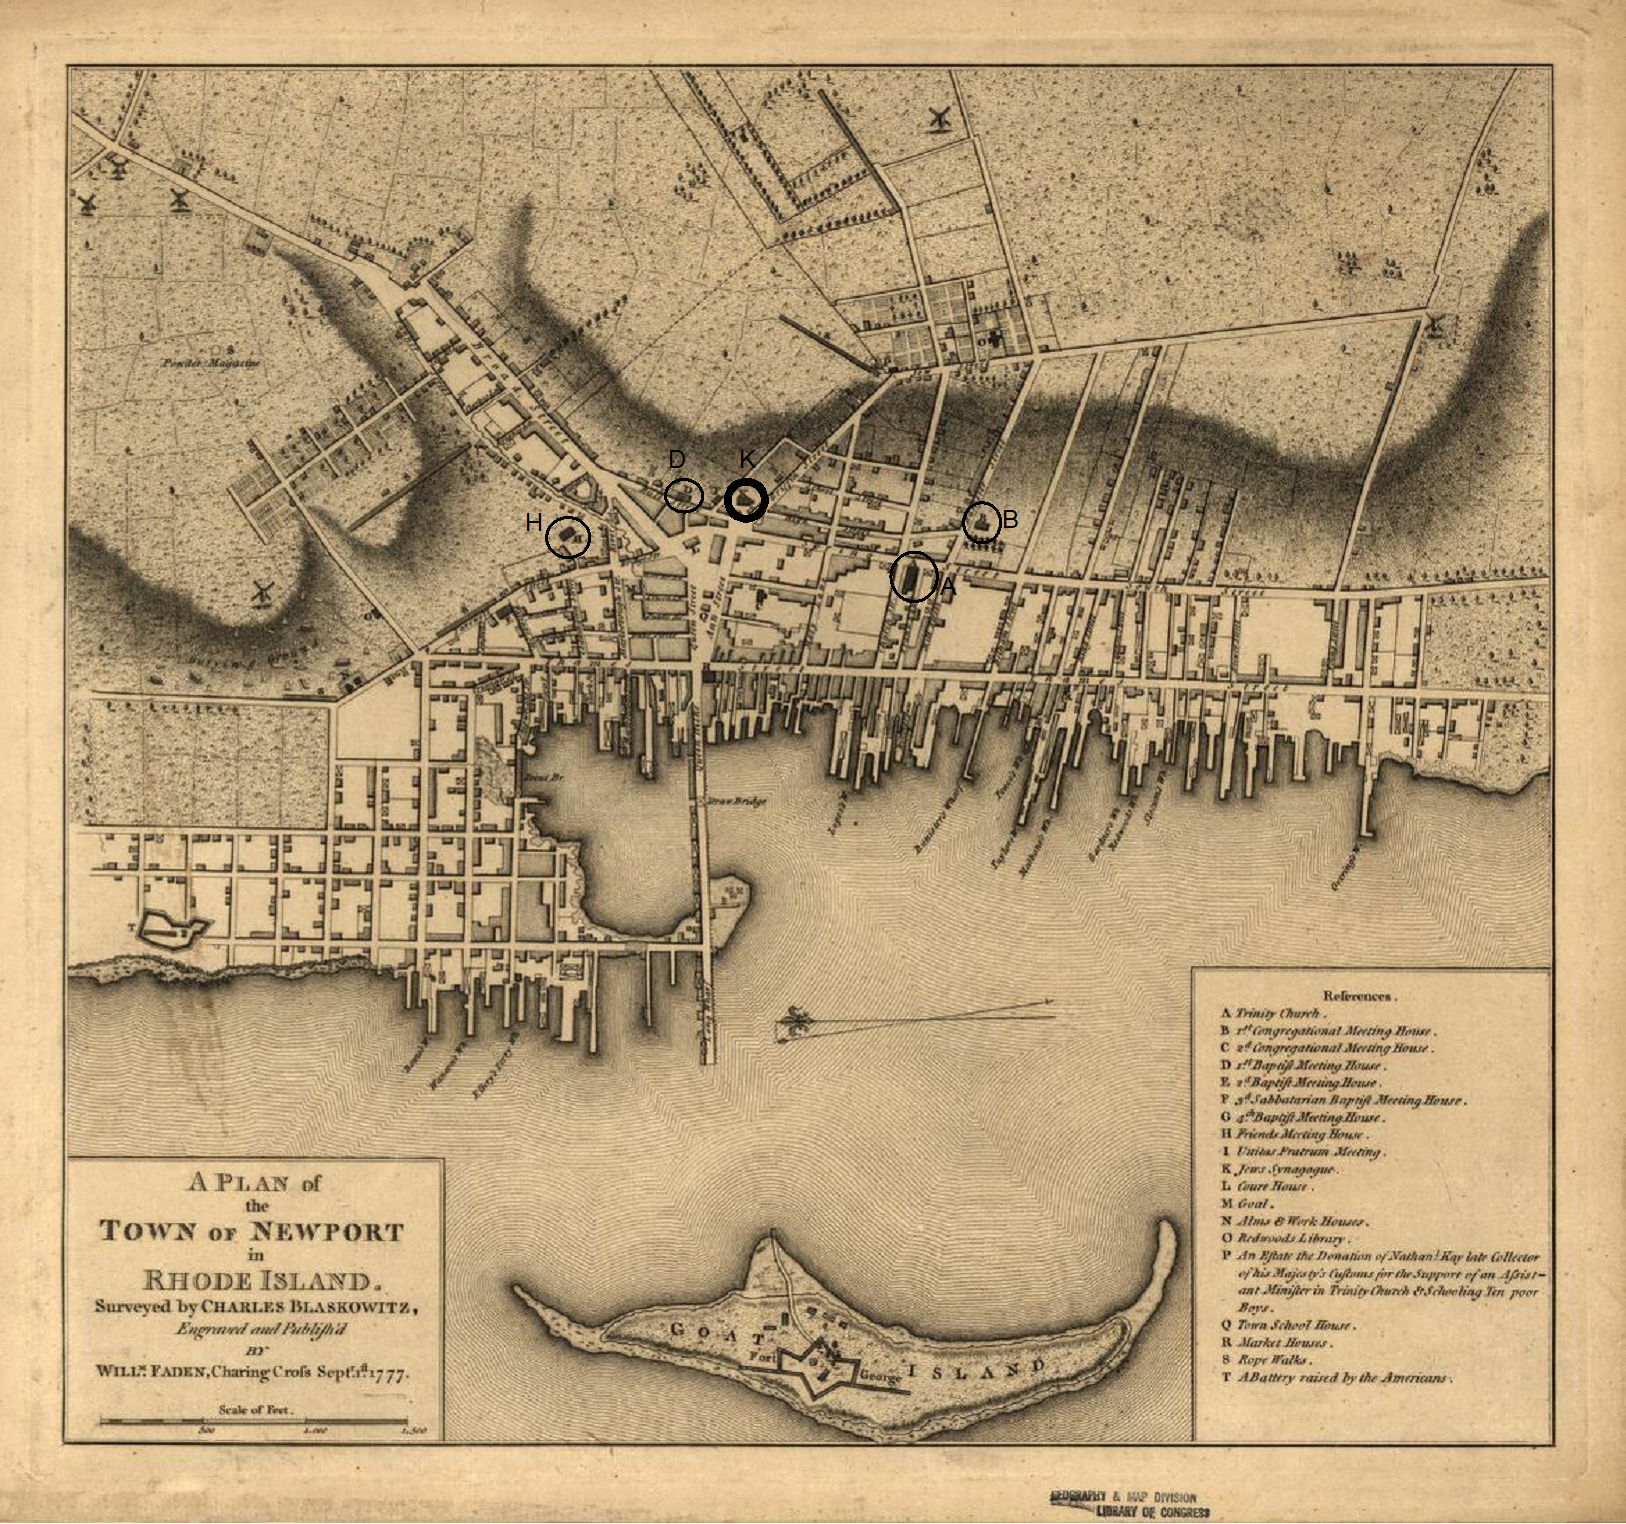 A plan of the town of Newport in Rhode Island,1777